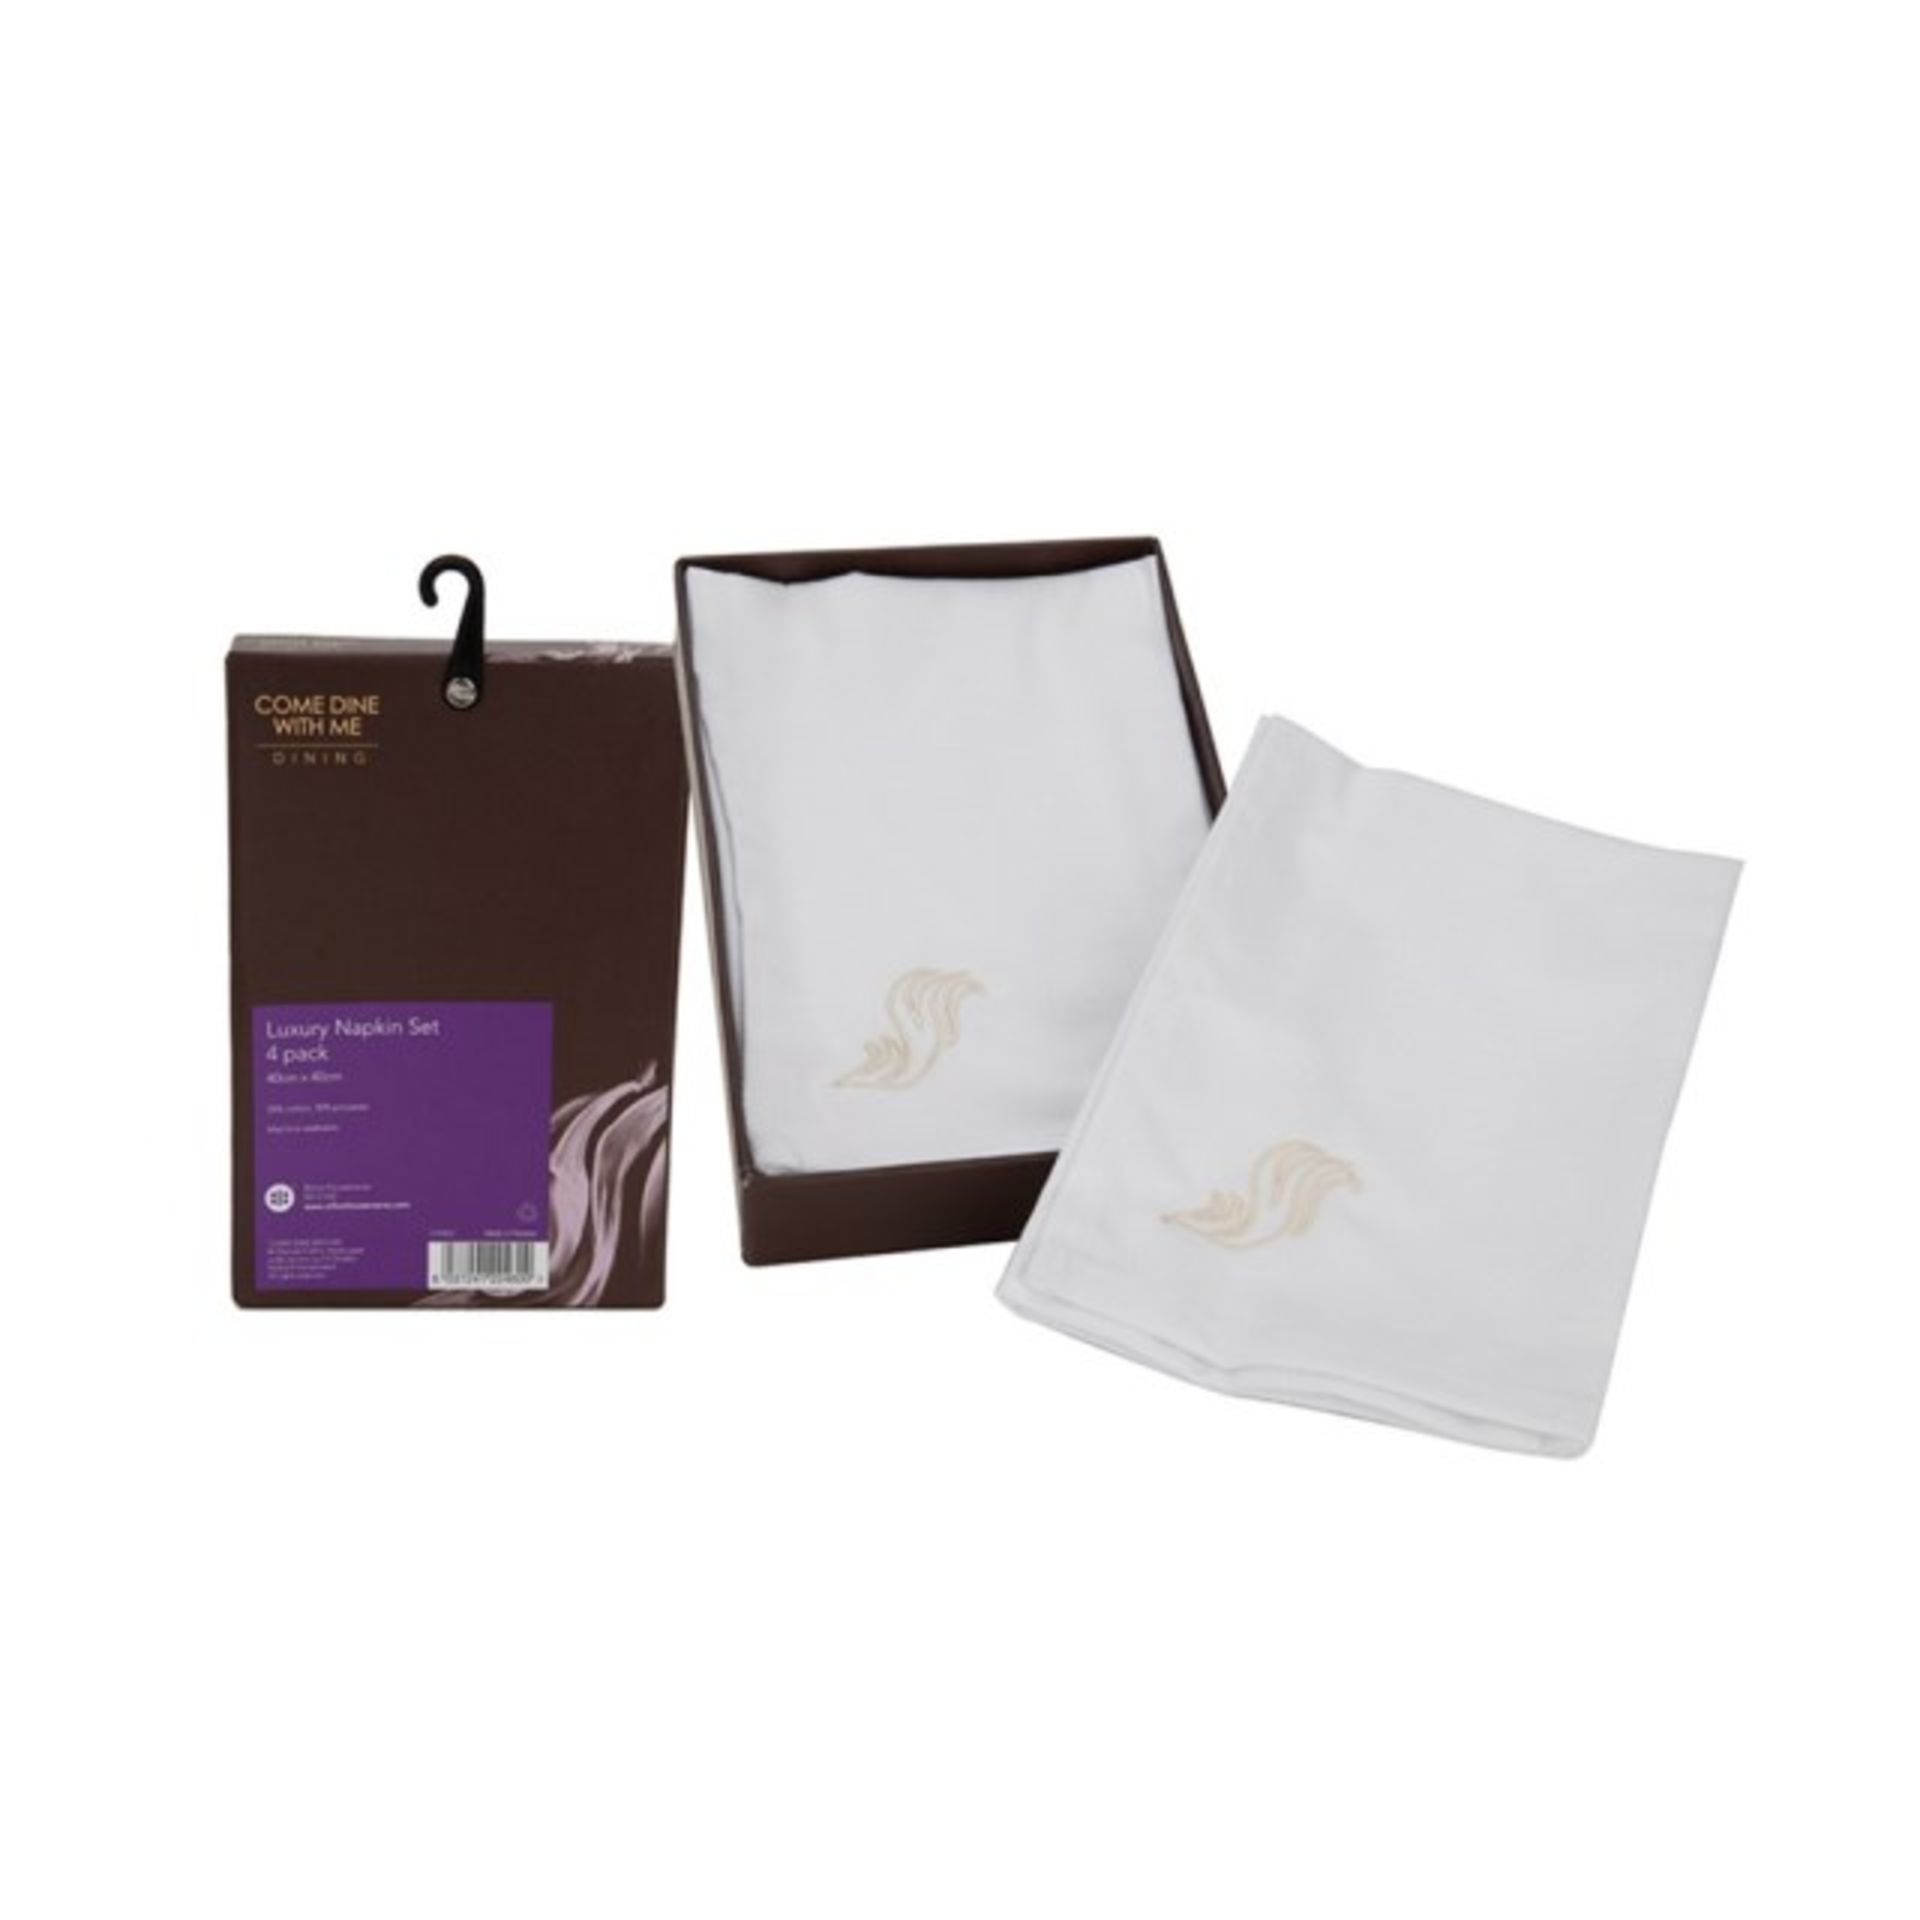 + VAT Grade A Come Dine With Me Luxury Napkin Set 4Pack